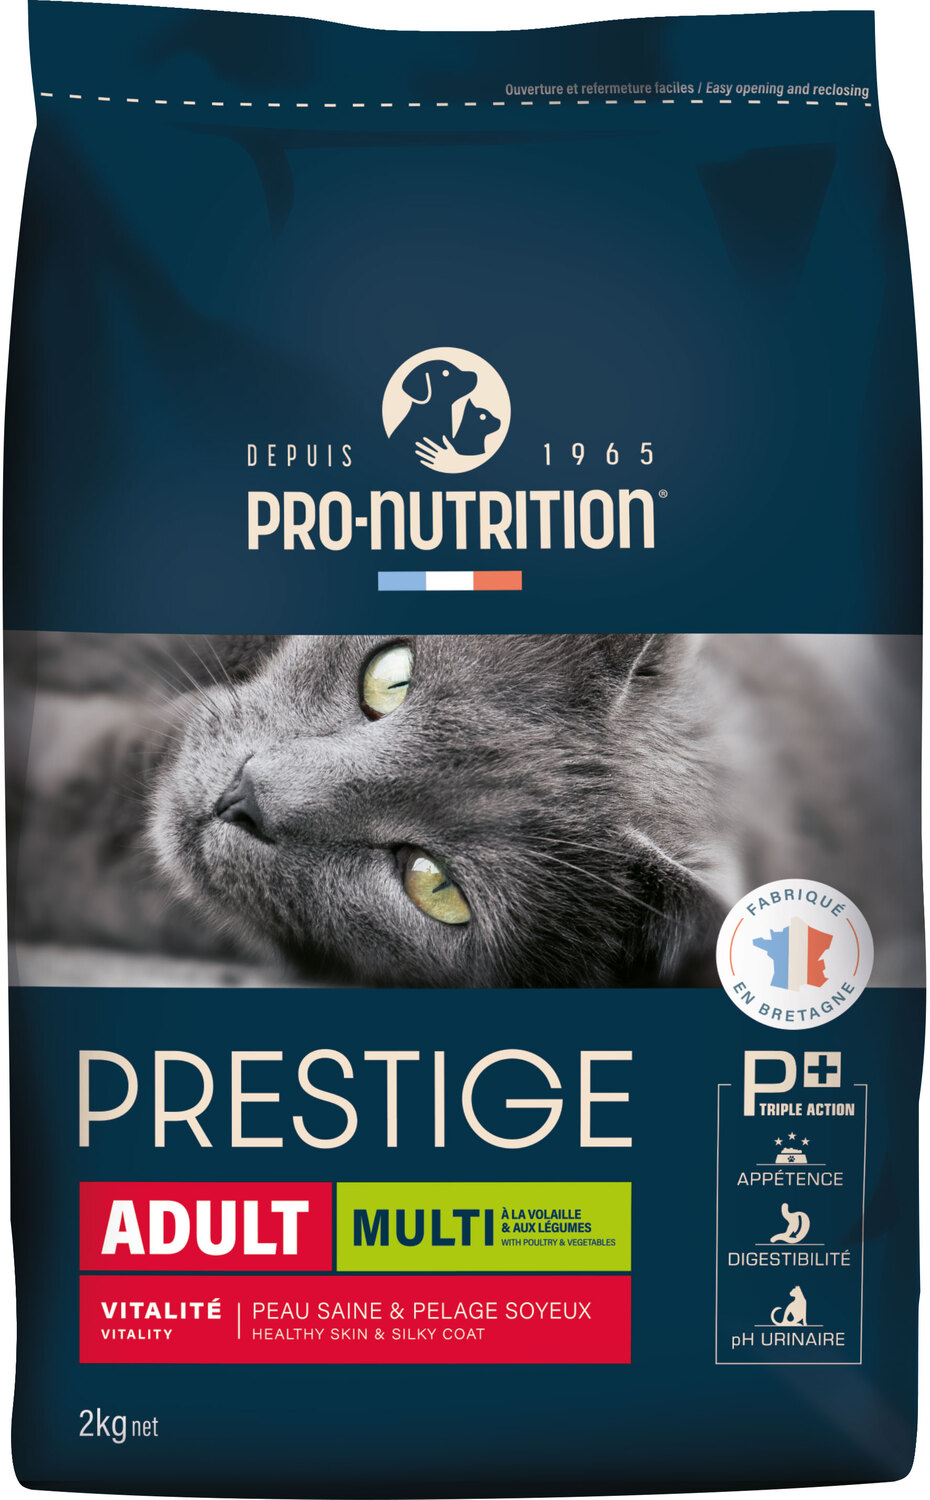 Pro-Nutrition Prestige Adult Multi with Poultry & Vegetables - zoom